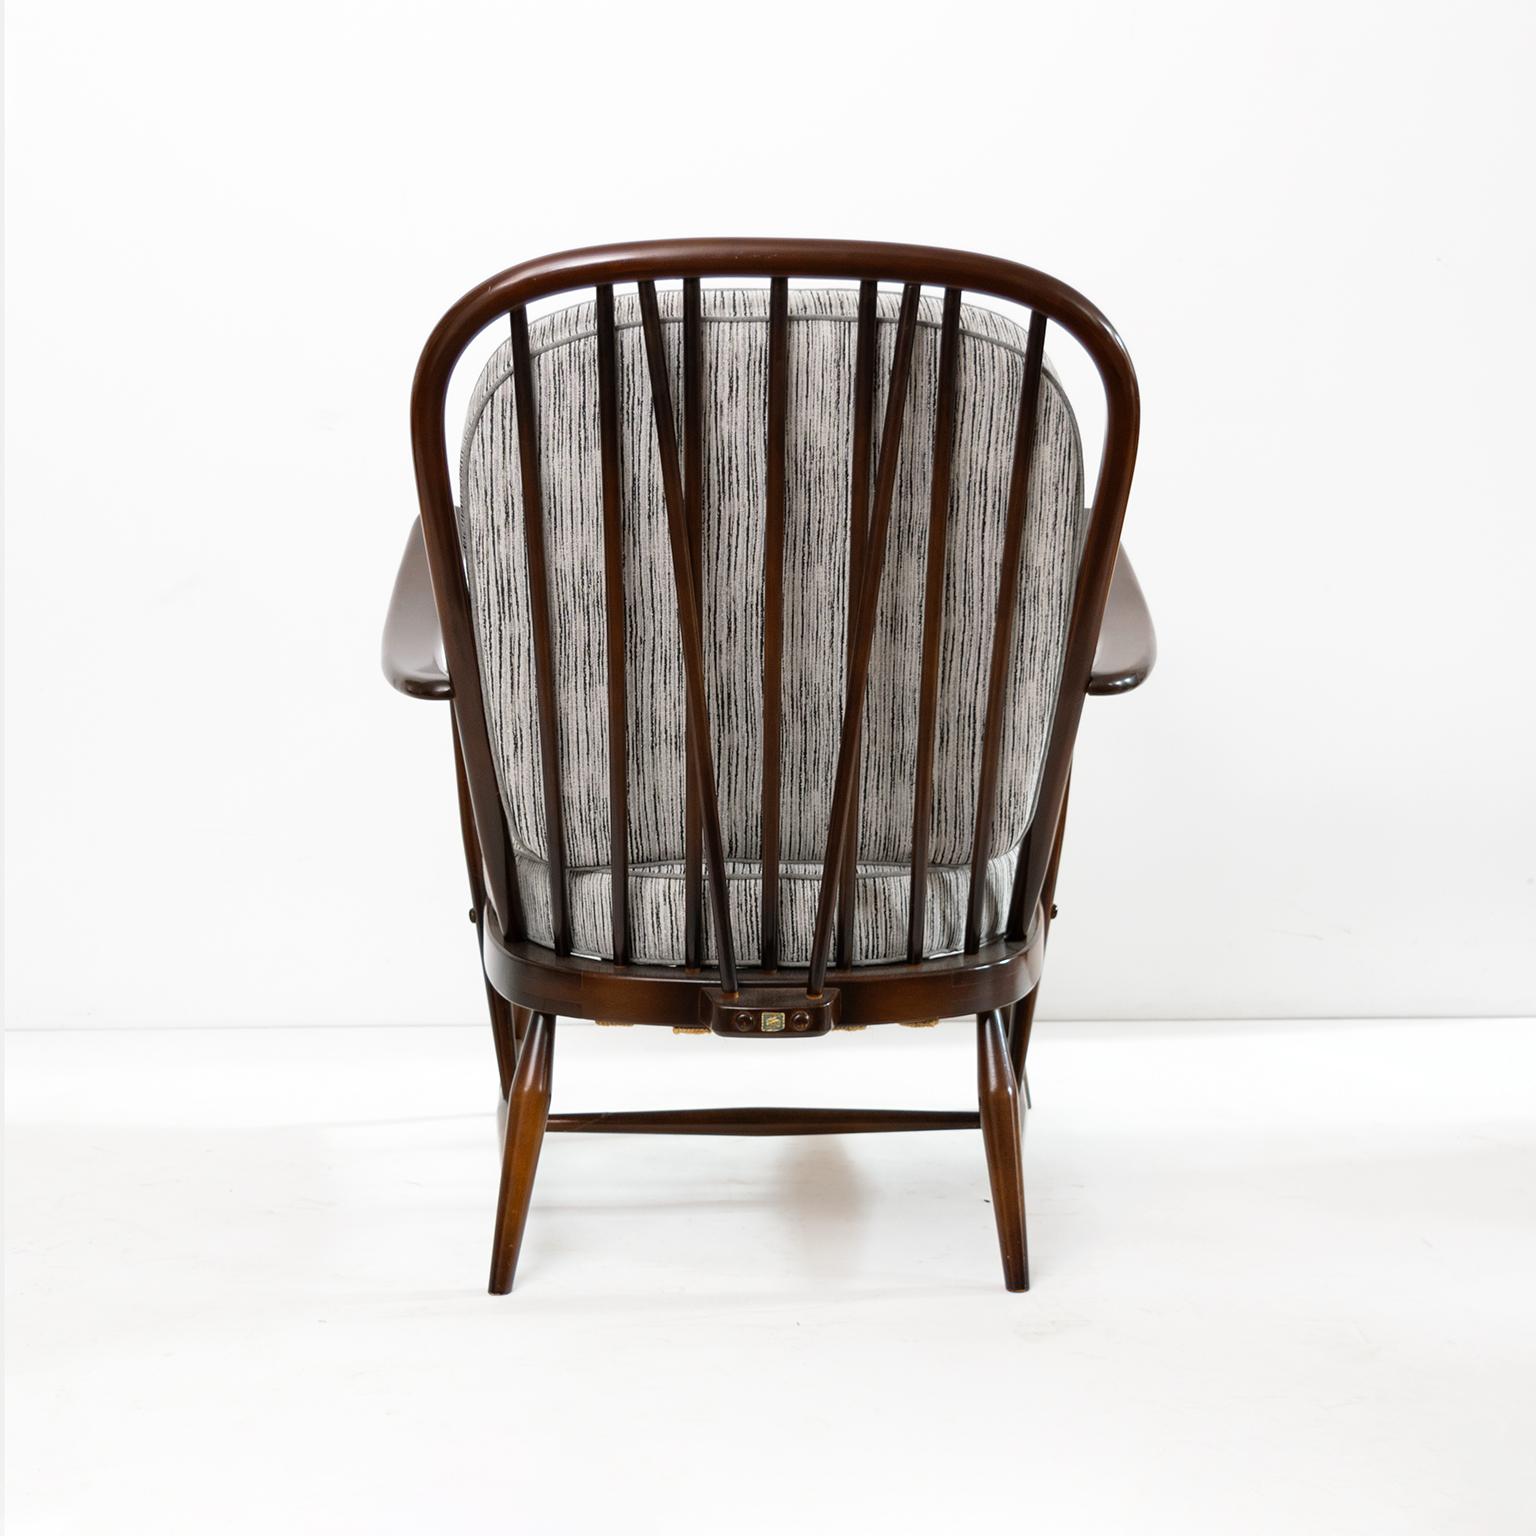 20th Century Lucian Randolph Ercolani Designed “Windsor” Chairs for Ercol, England, 1950's